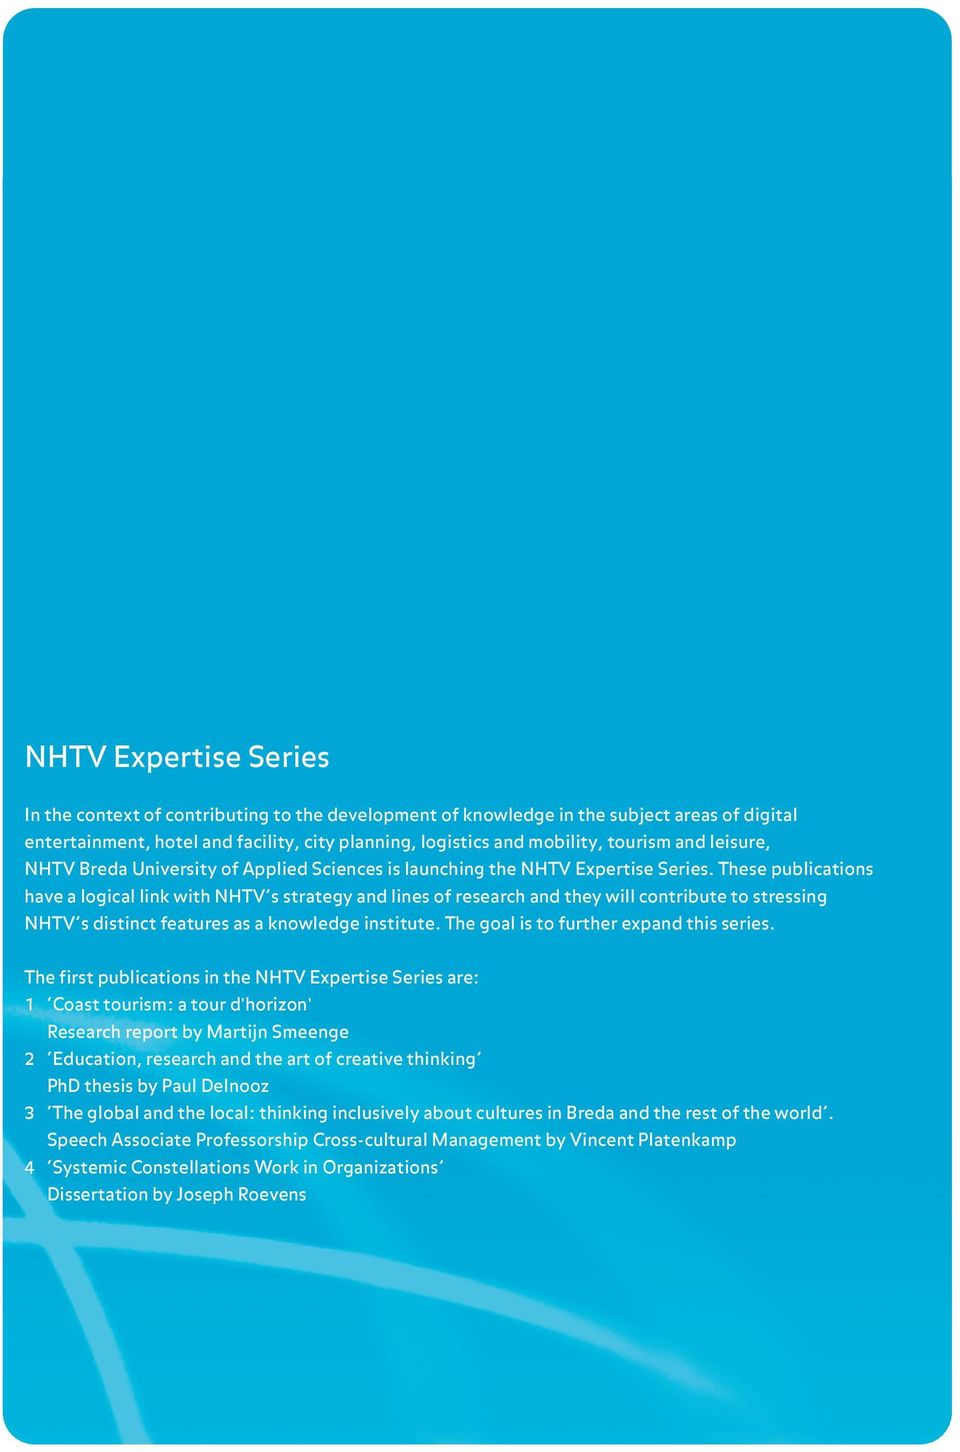 These publications have a logical link with NHTV s strategy and lines of research and they will contribute to stressing NHTV s distinct features as a knowledge institute.